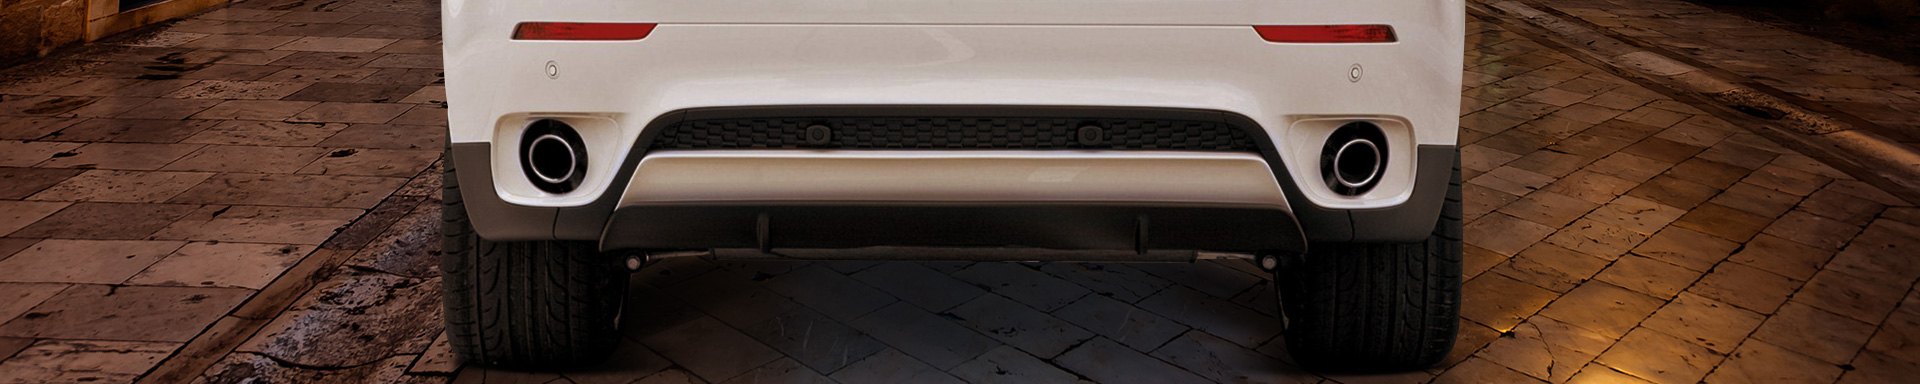 Carbon Creations Now Offers Carbon Fiber Rear Diffuser for BMW X6